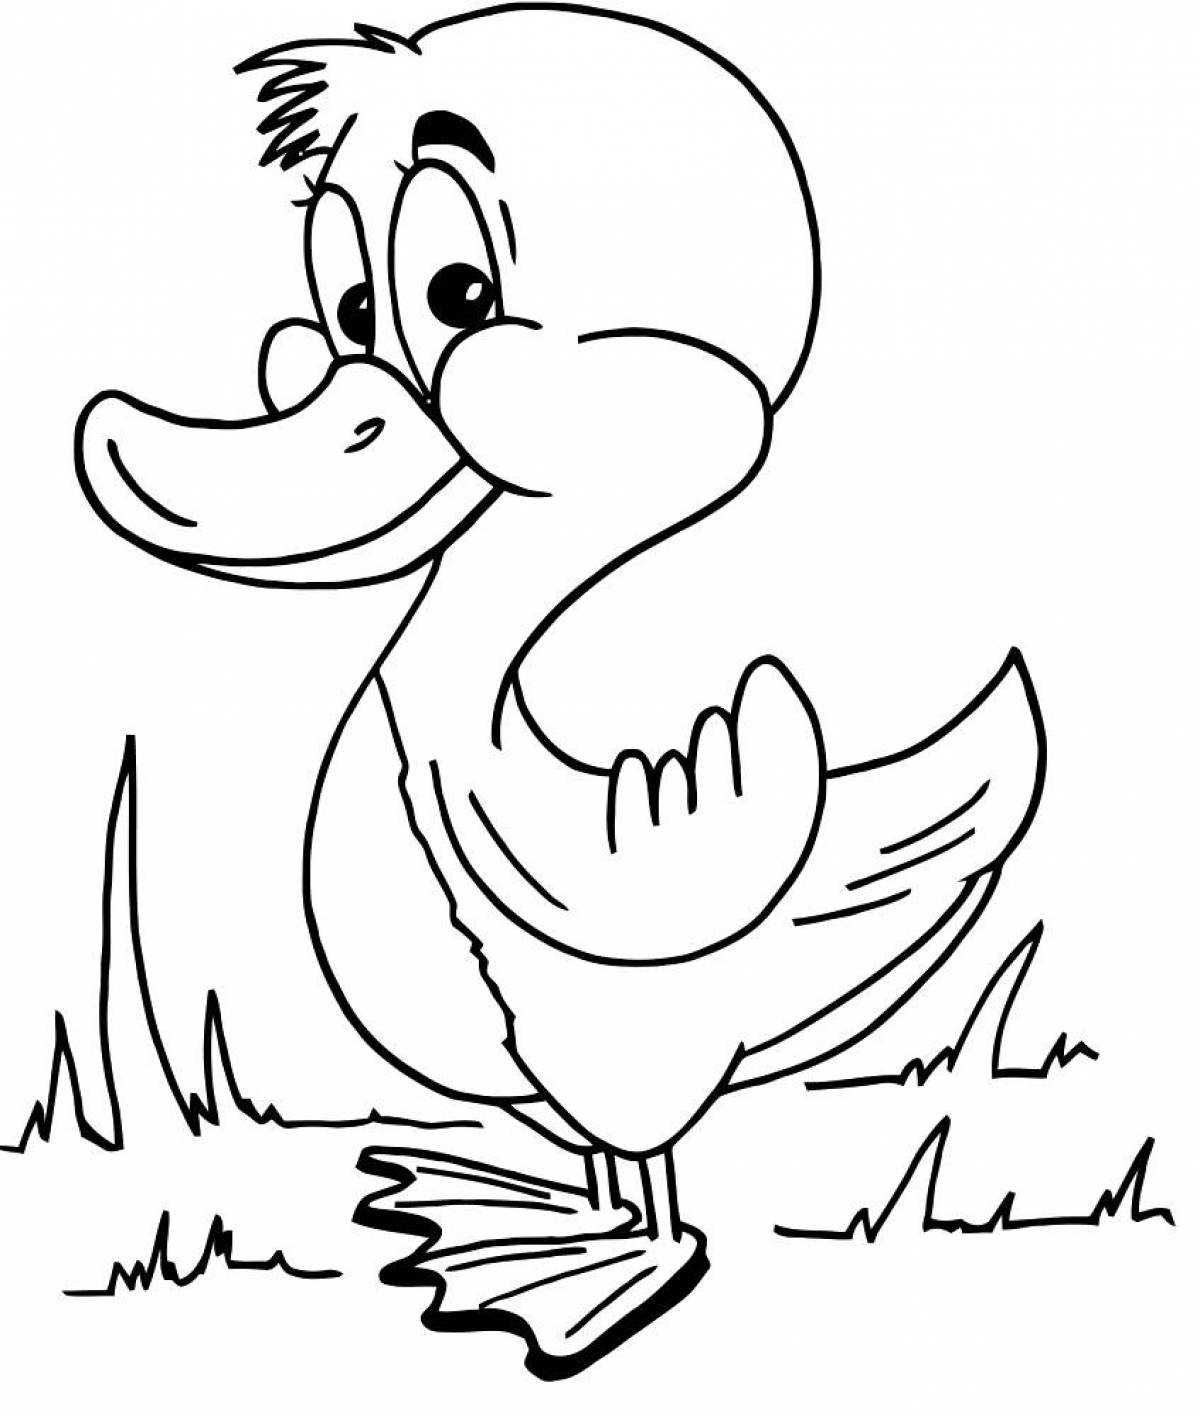 Coloring funny duck lalafanfan